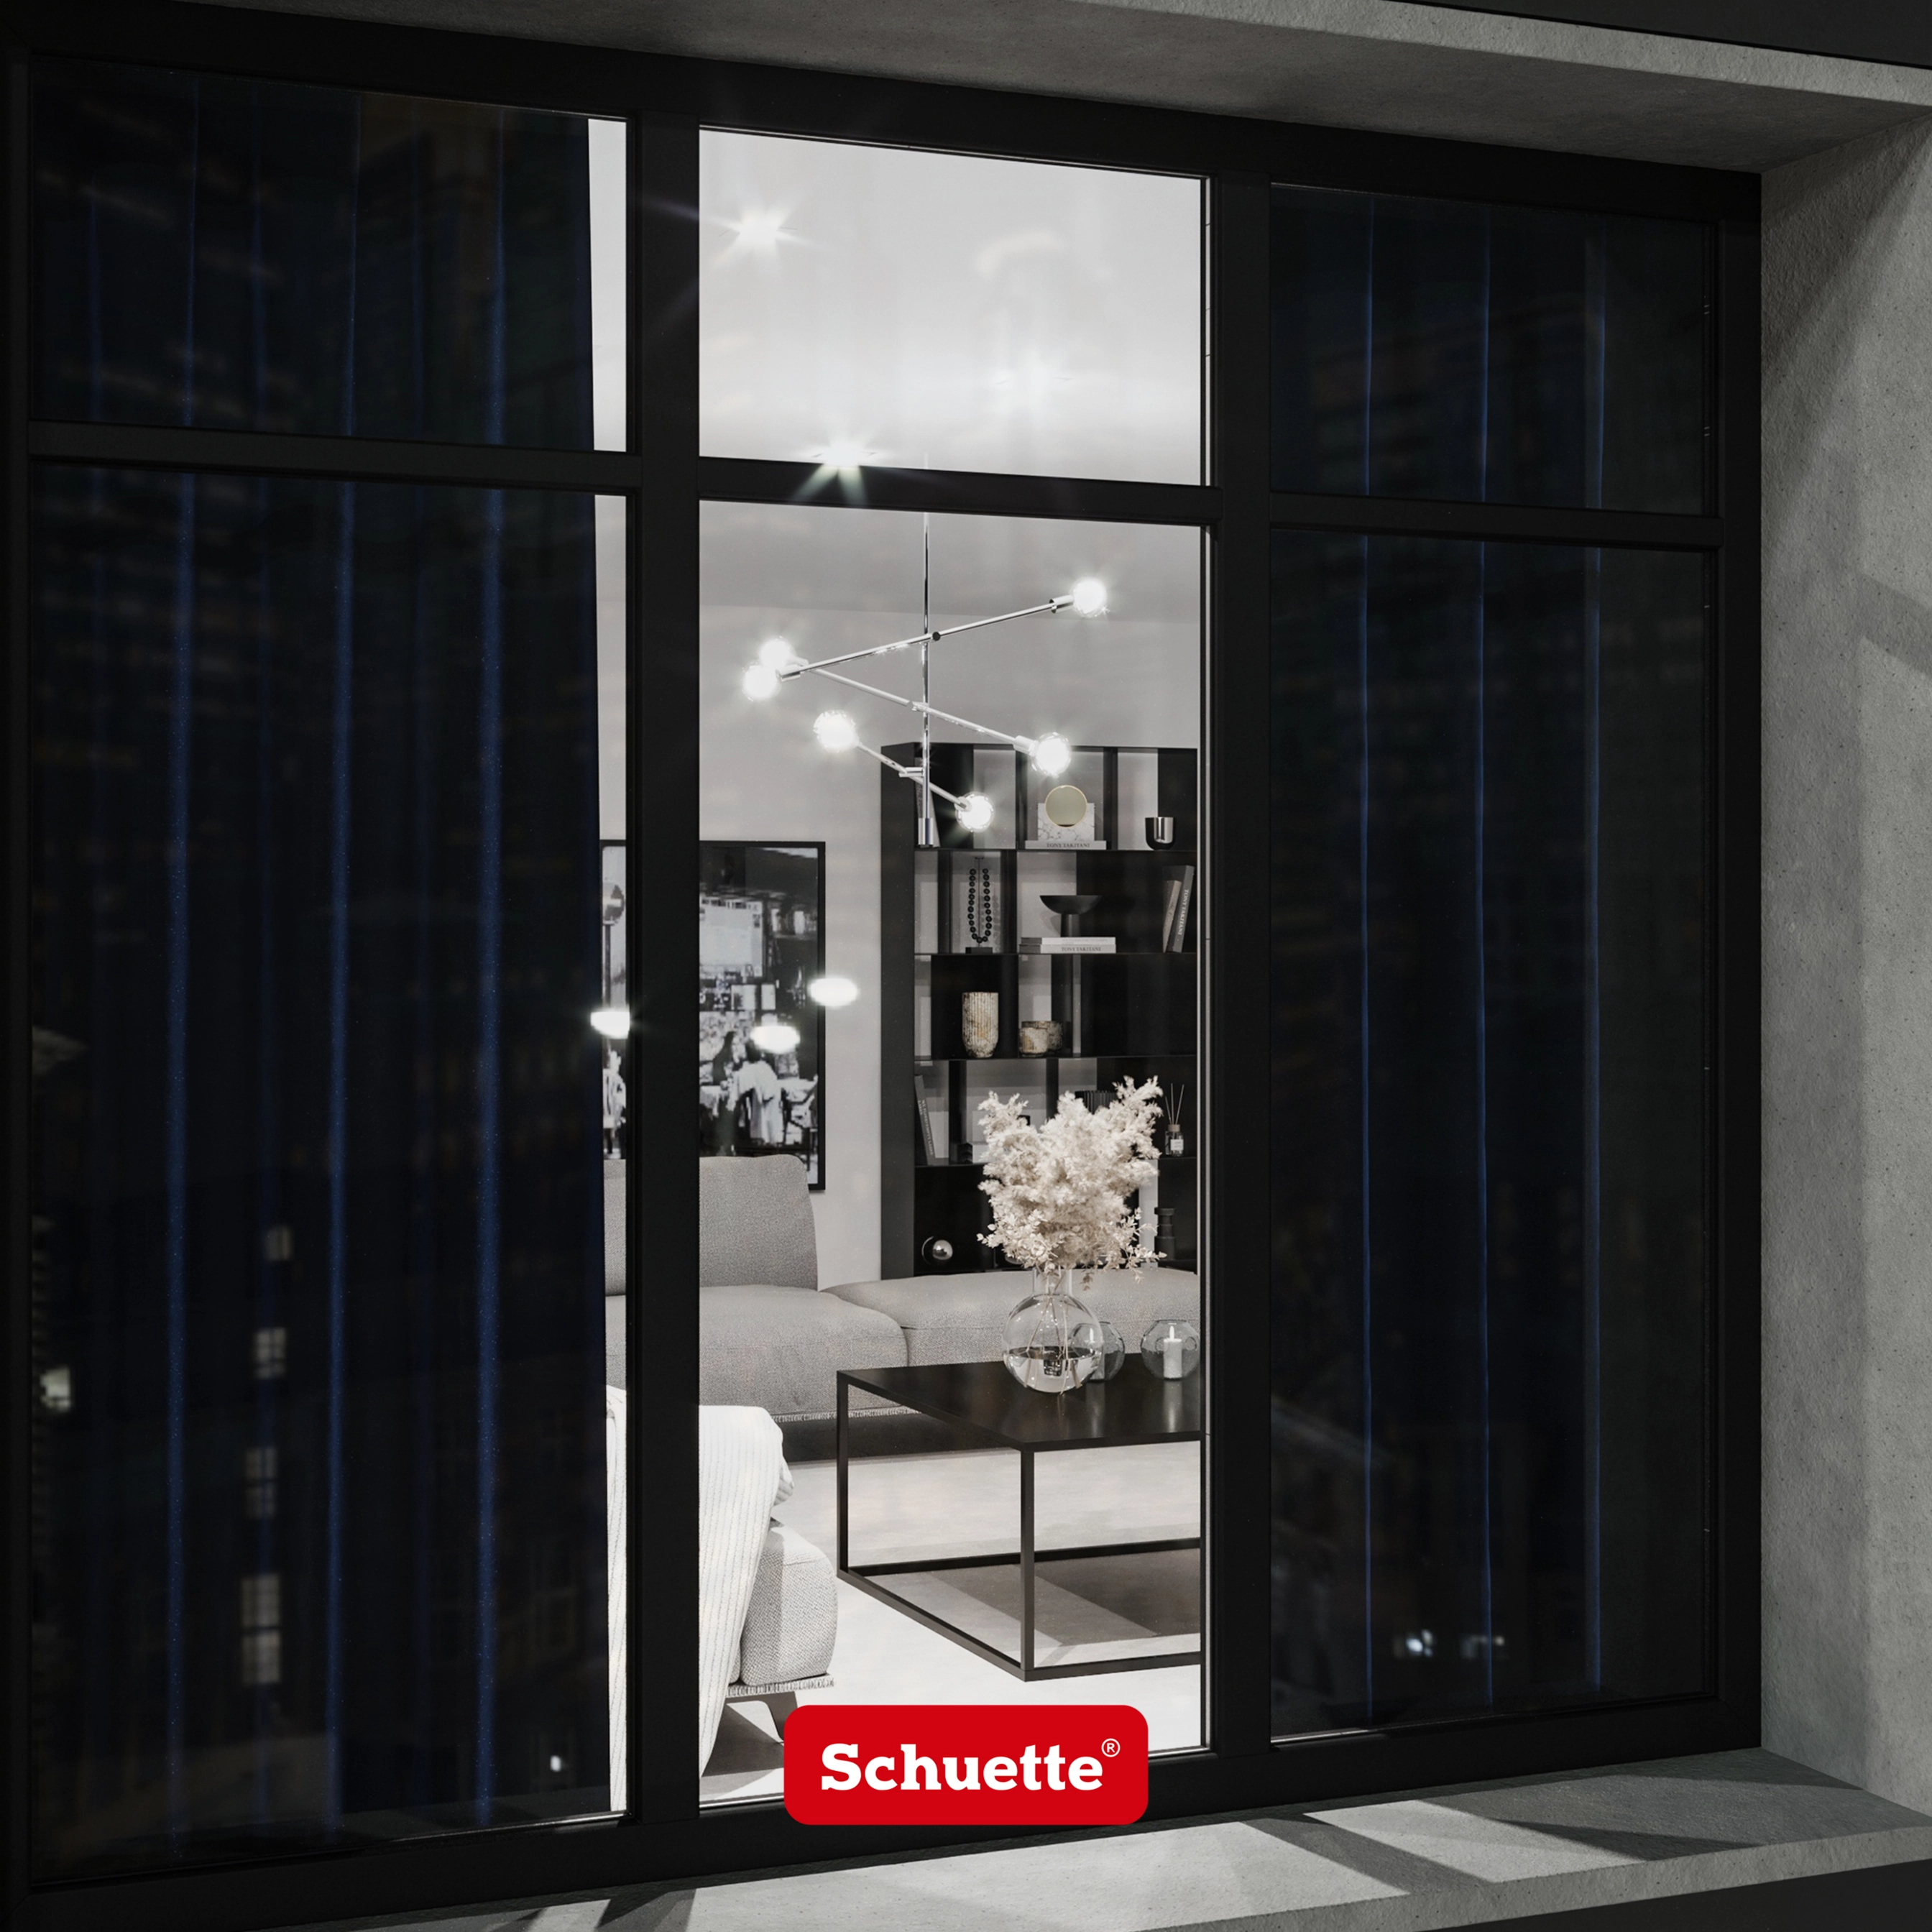 Schuette® Blackout Curtain with Eyelets ● Millenium Velvet Collection: Koala Shade (Grey) ● 1 piece ● Crease-resistant Easy-care Thermo Opaque & heavily darkening